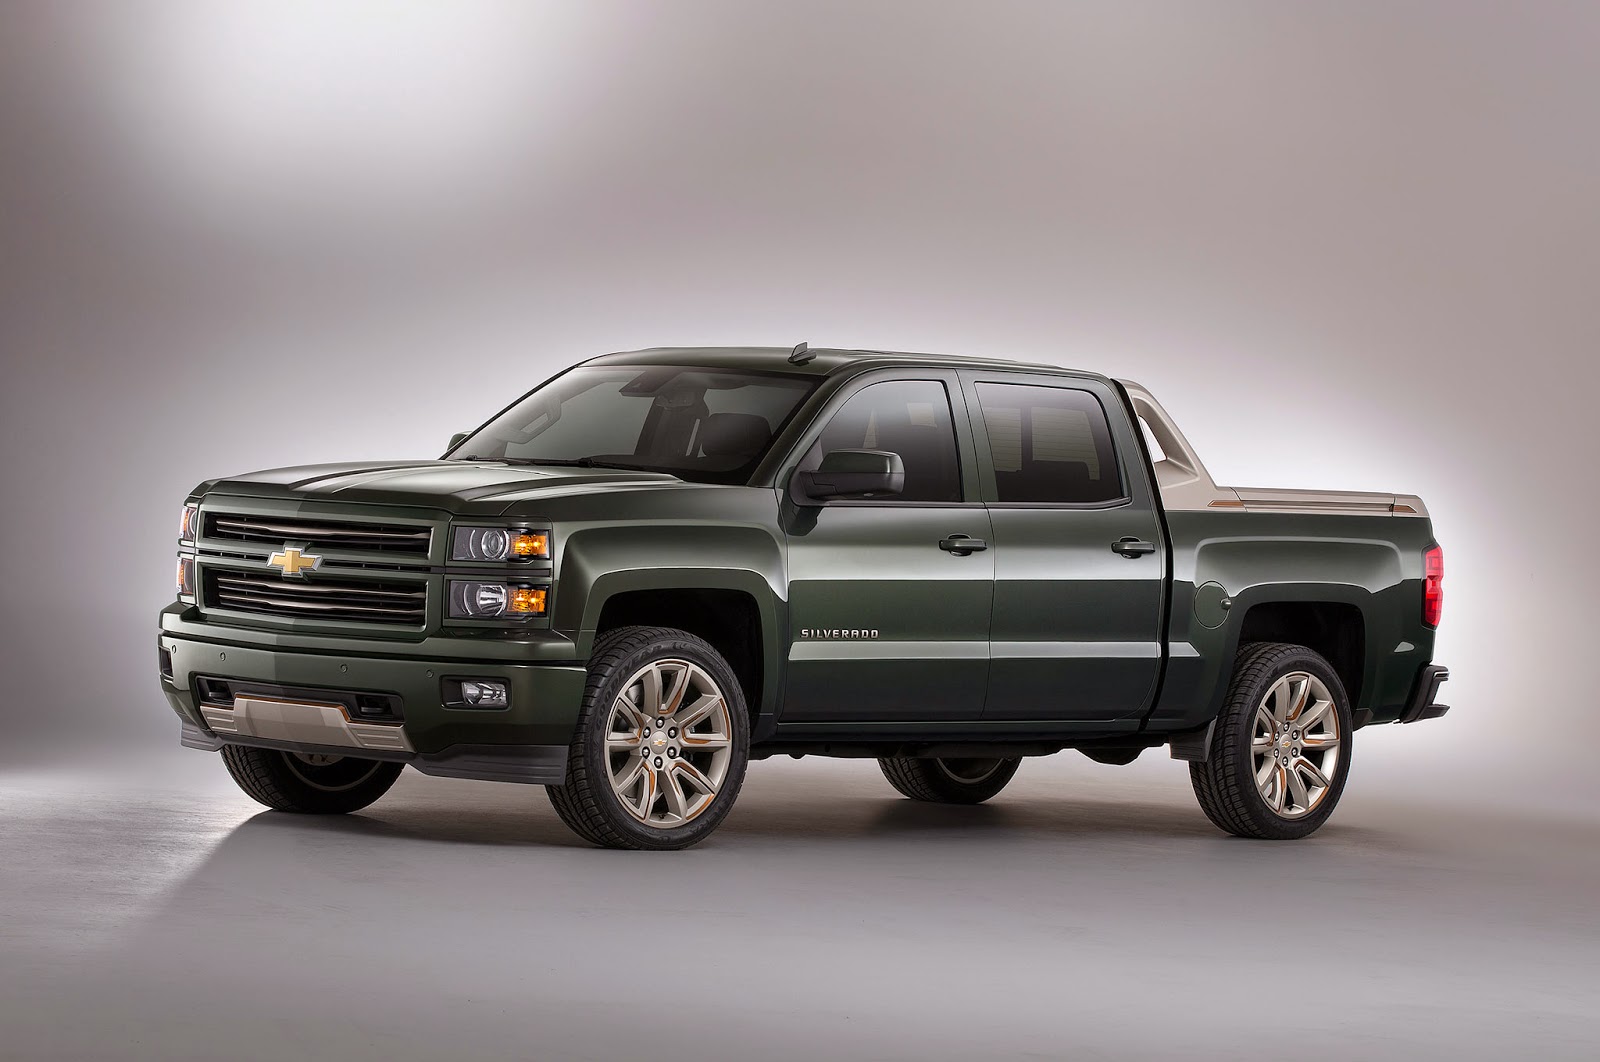 Jim Butler The Chevy Powerhouse in St. Louis: 2015 Chevy Silverado: The